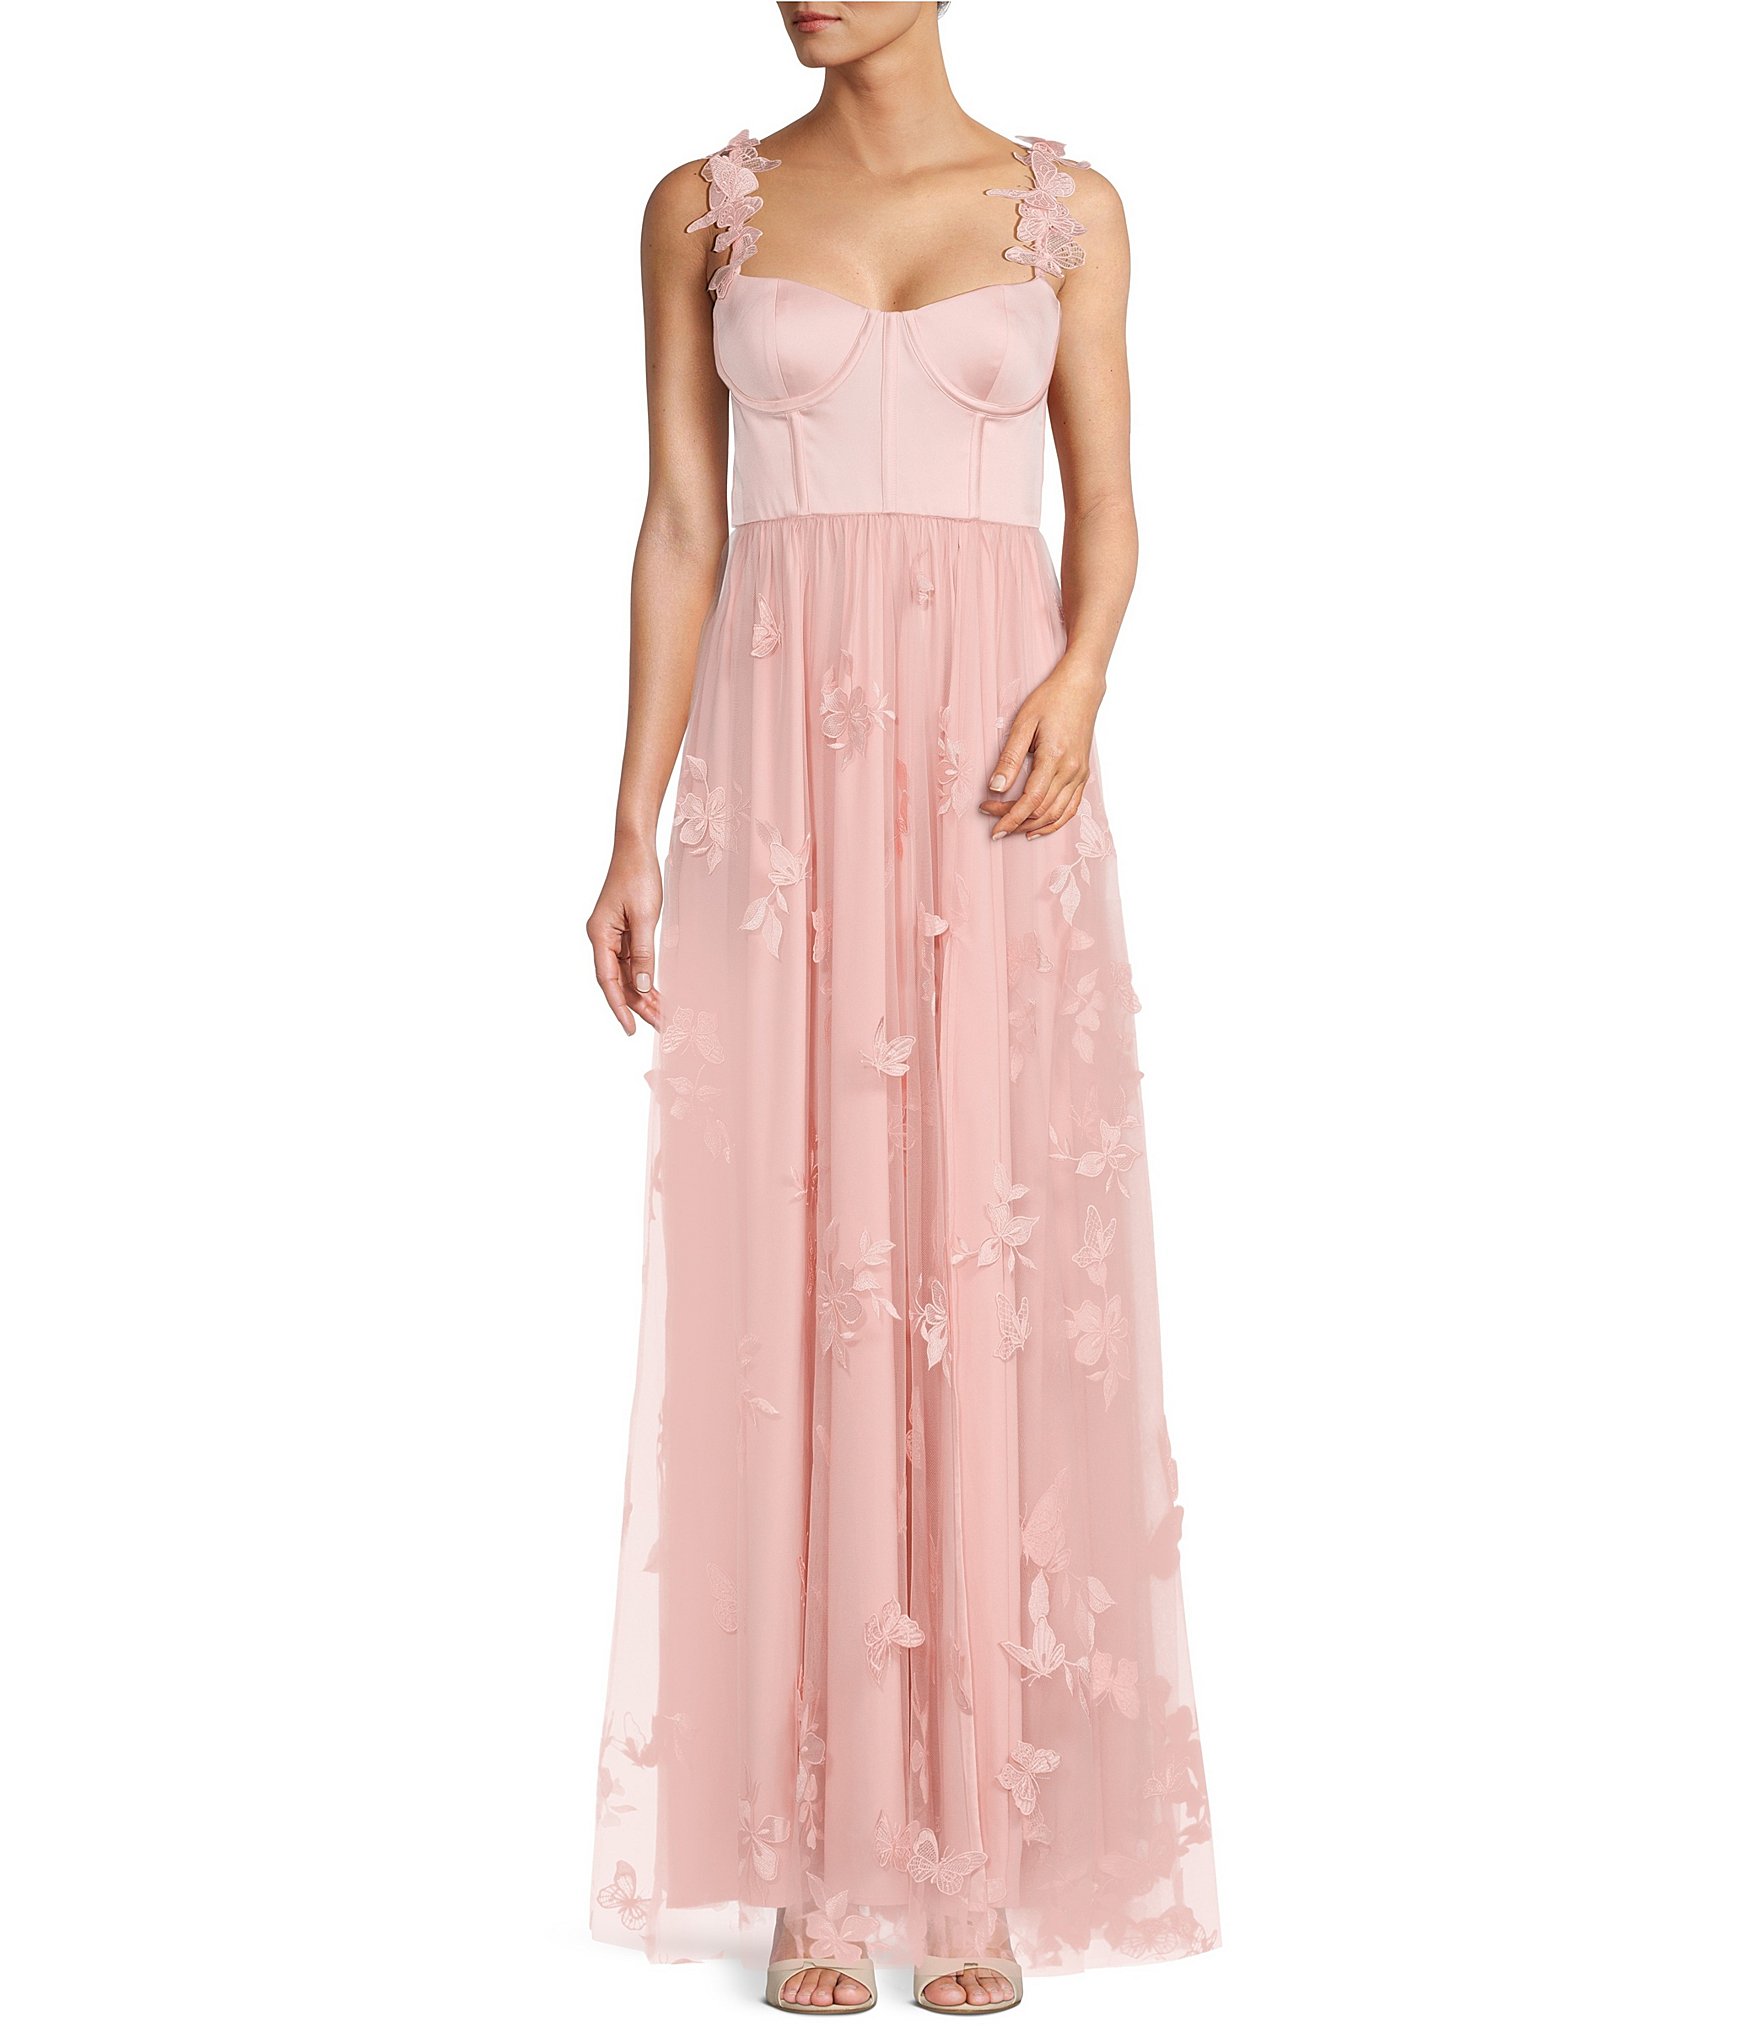 Antonio Melani x Breast Cancer Awareness Capsule Mely Satin Embroidered ...